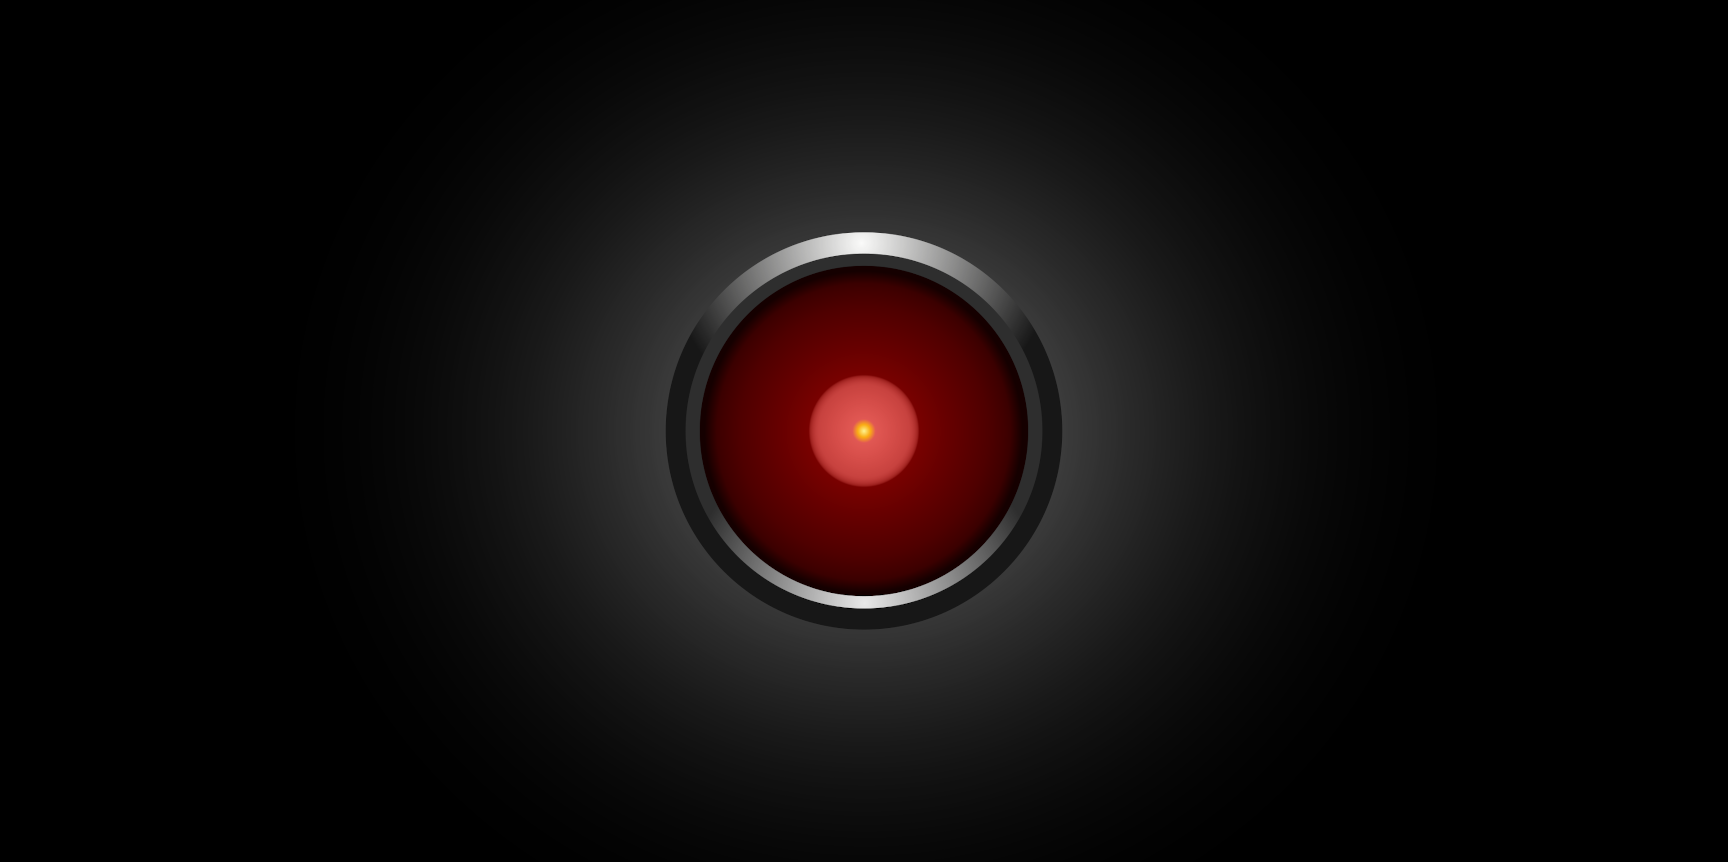 Enlarged view: HAL-9000 ( CC BY-NC 3.0 / qsc123951 / Deviant Art )